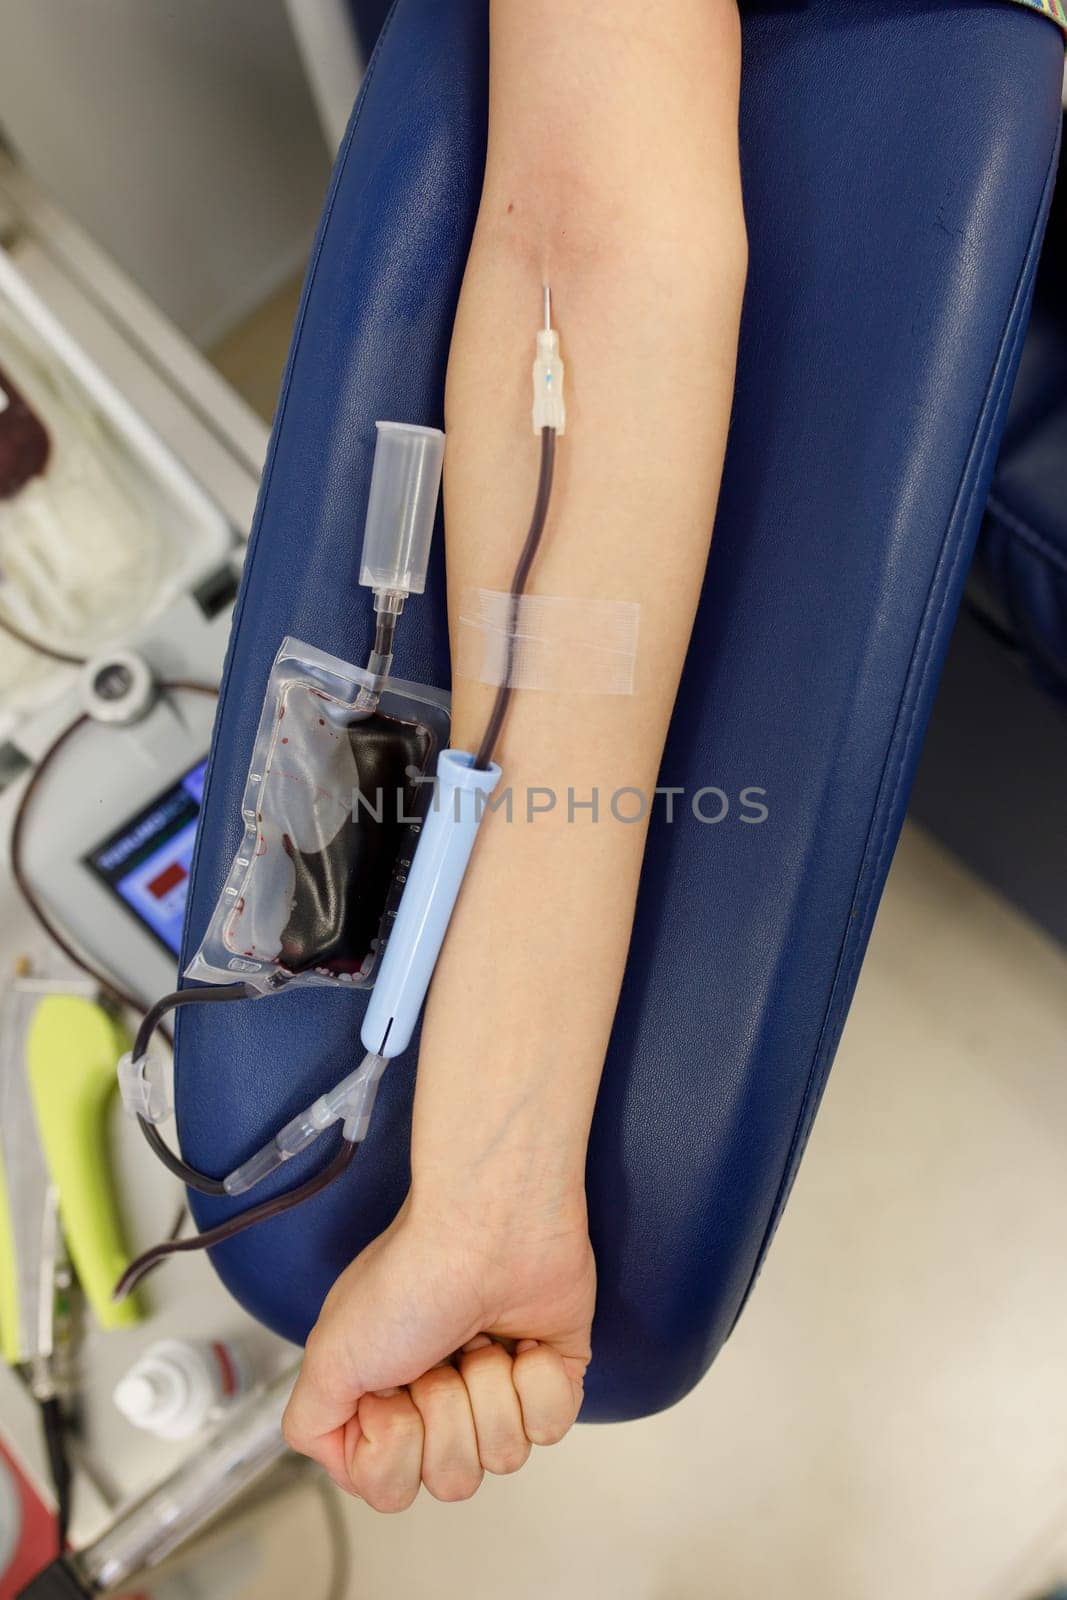 blood donor, gives blood in the laboratory. High quality photo